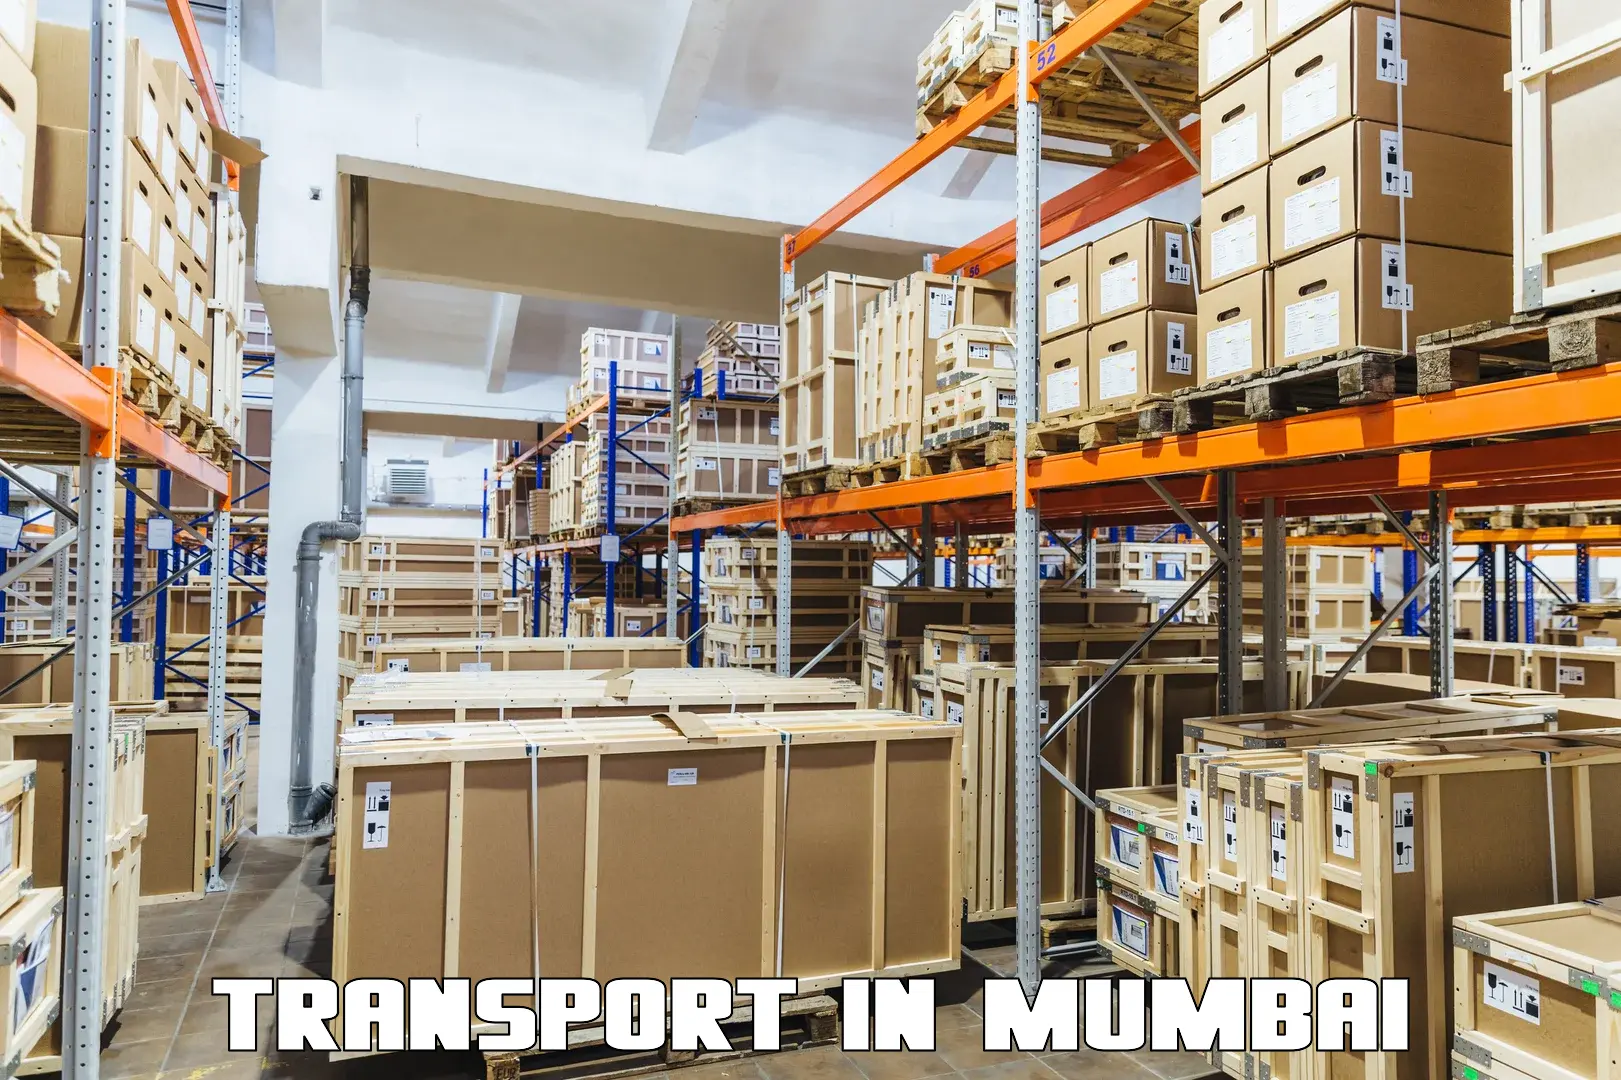 Daily parcel service transport in Mumbai